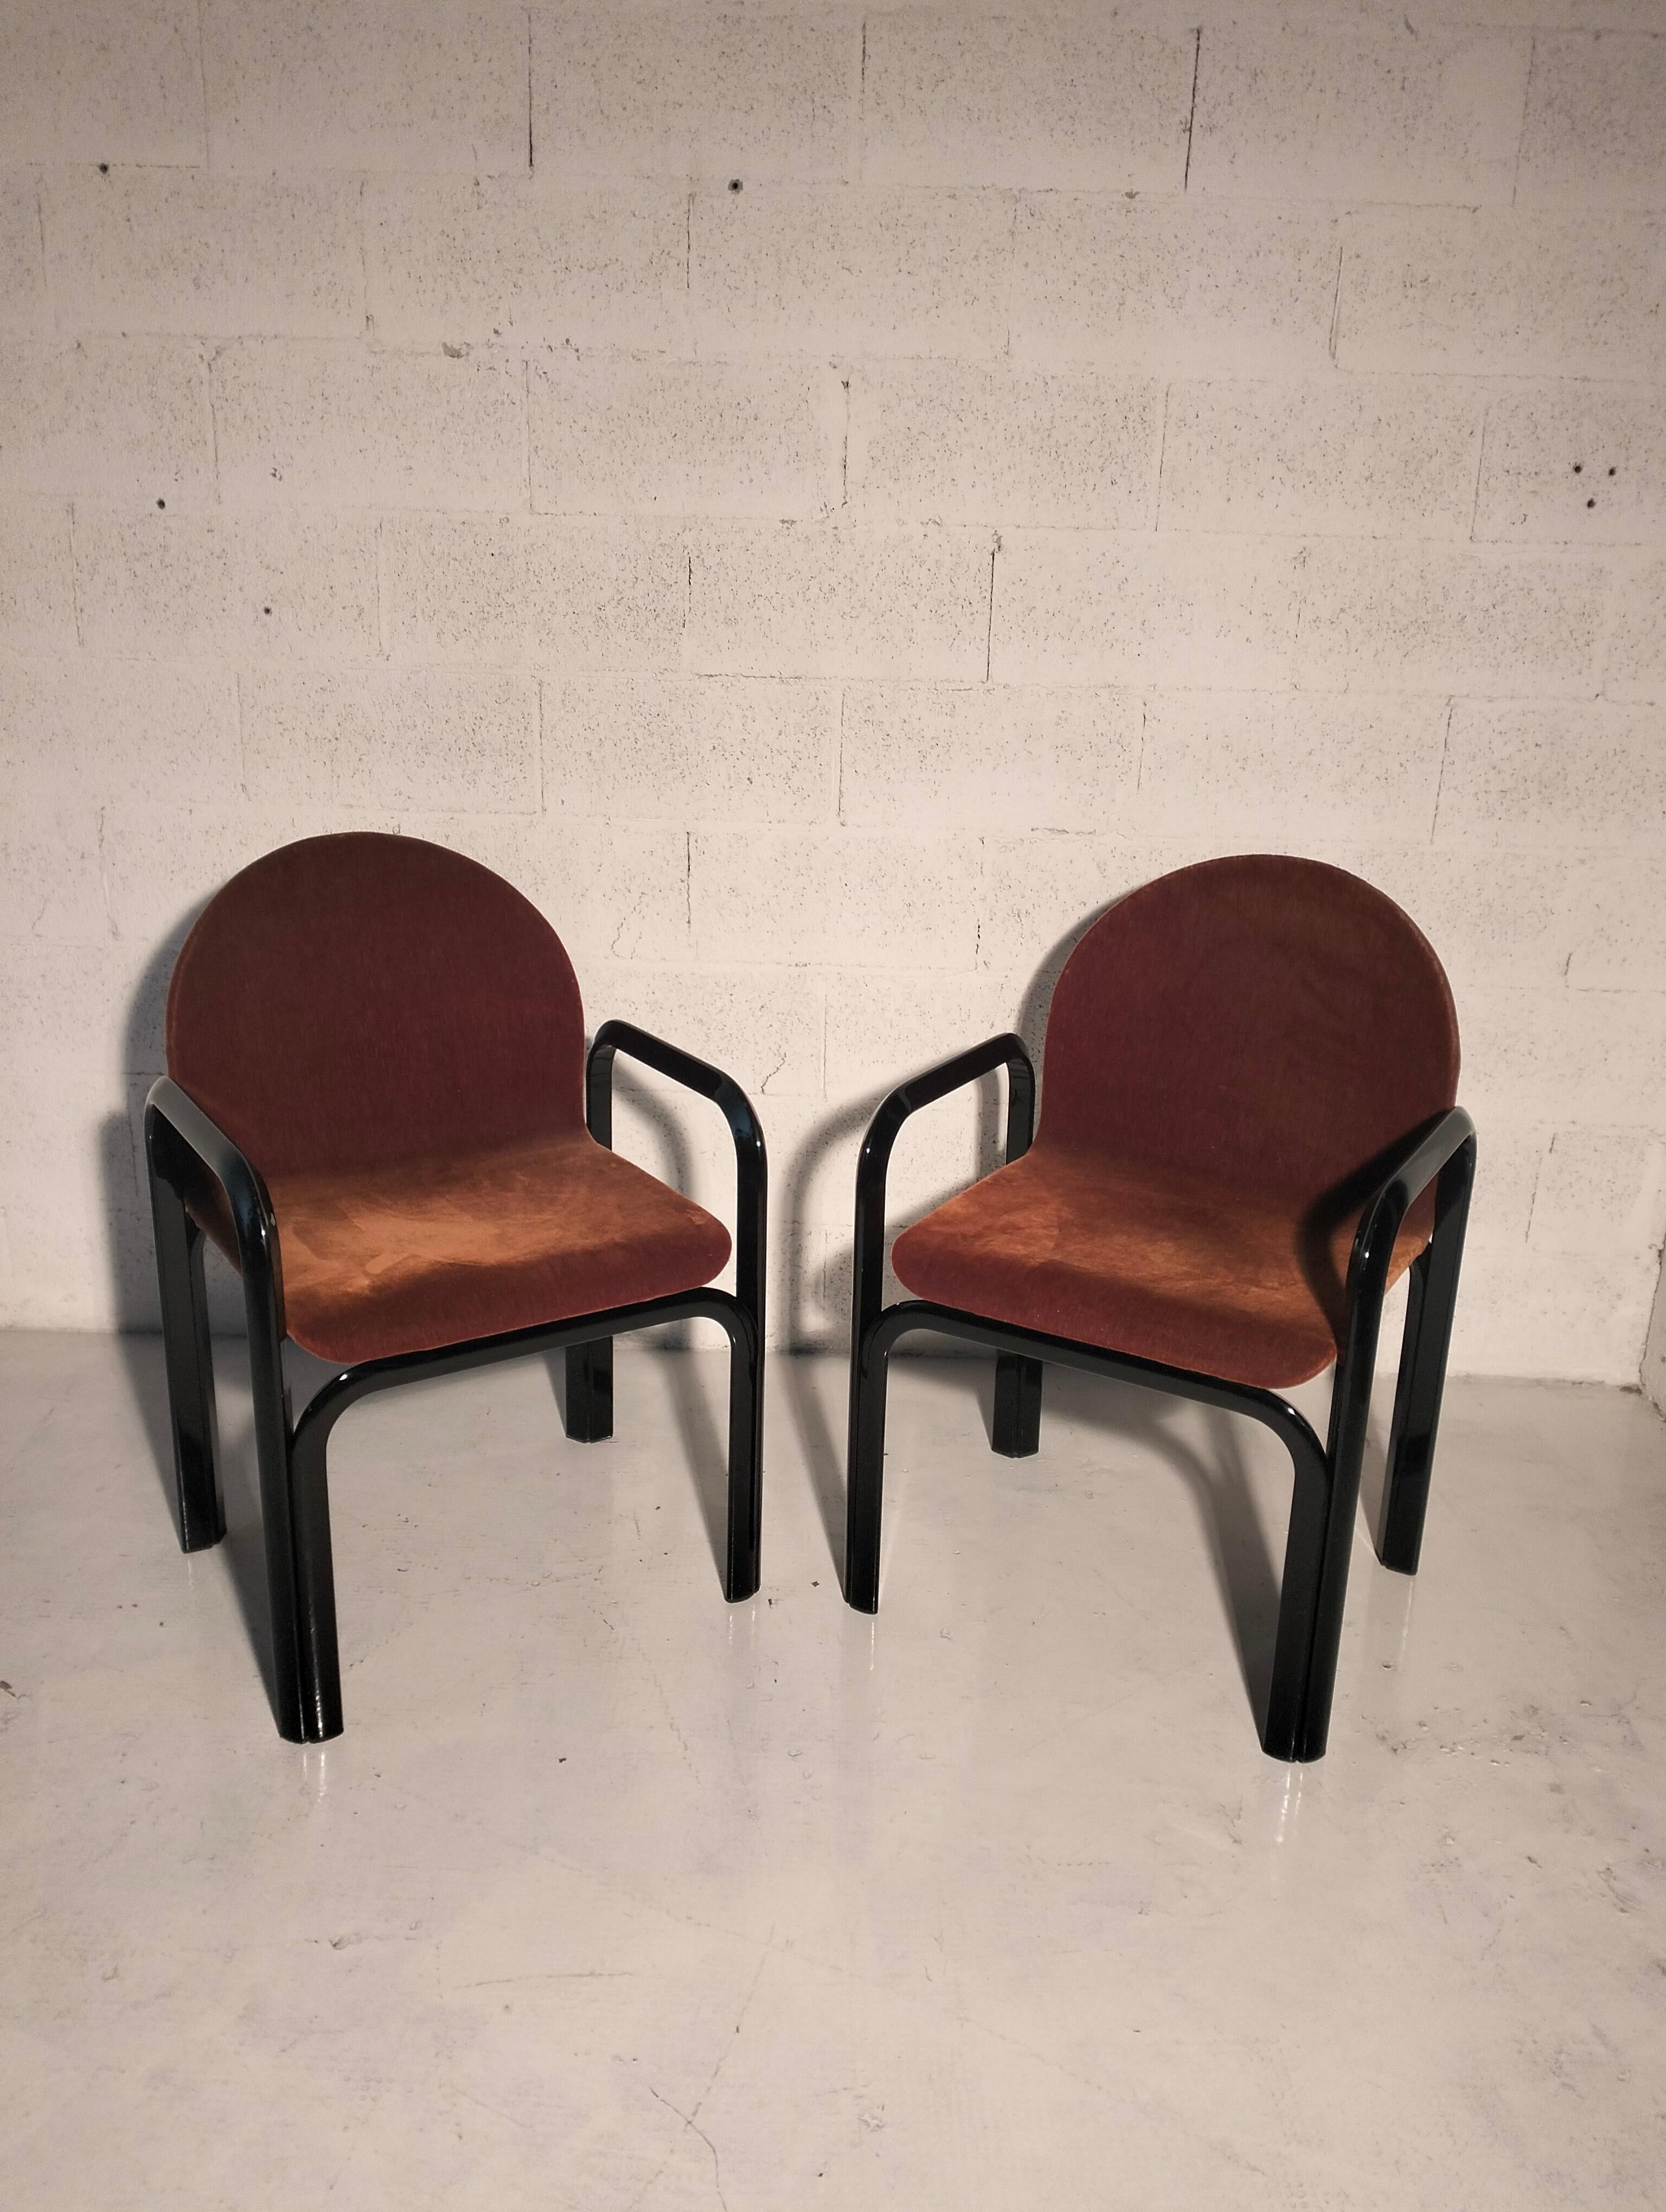 Set of 4 chairs and 1 square table Orsay mod. by Gae Aulenti for Knoll 80s For Sale 5